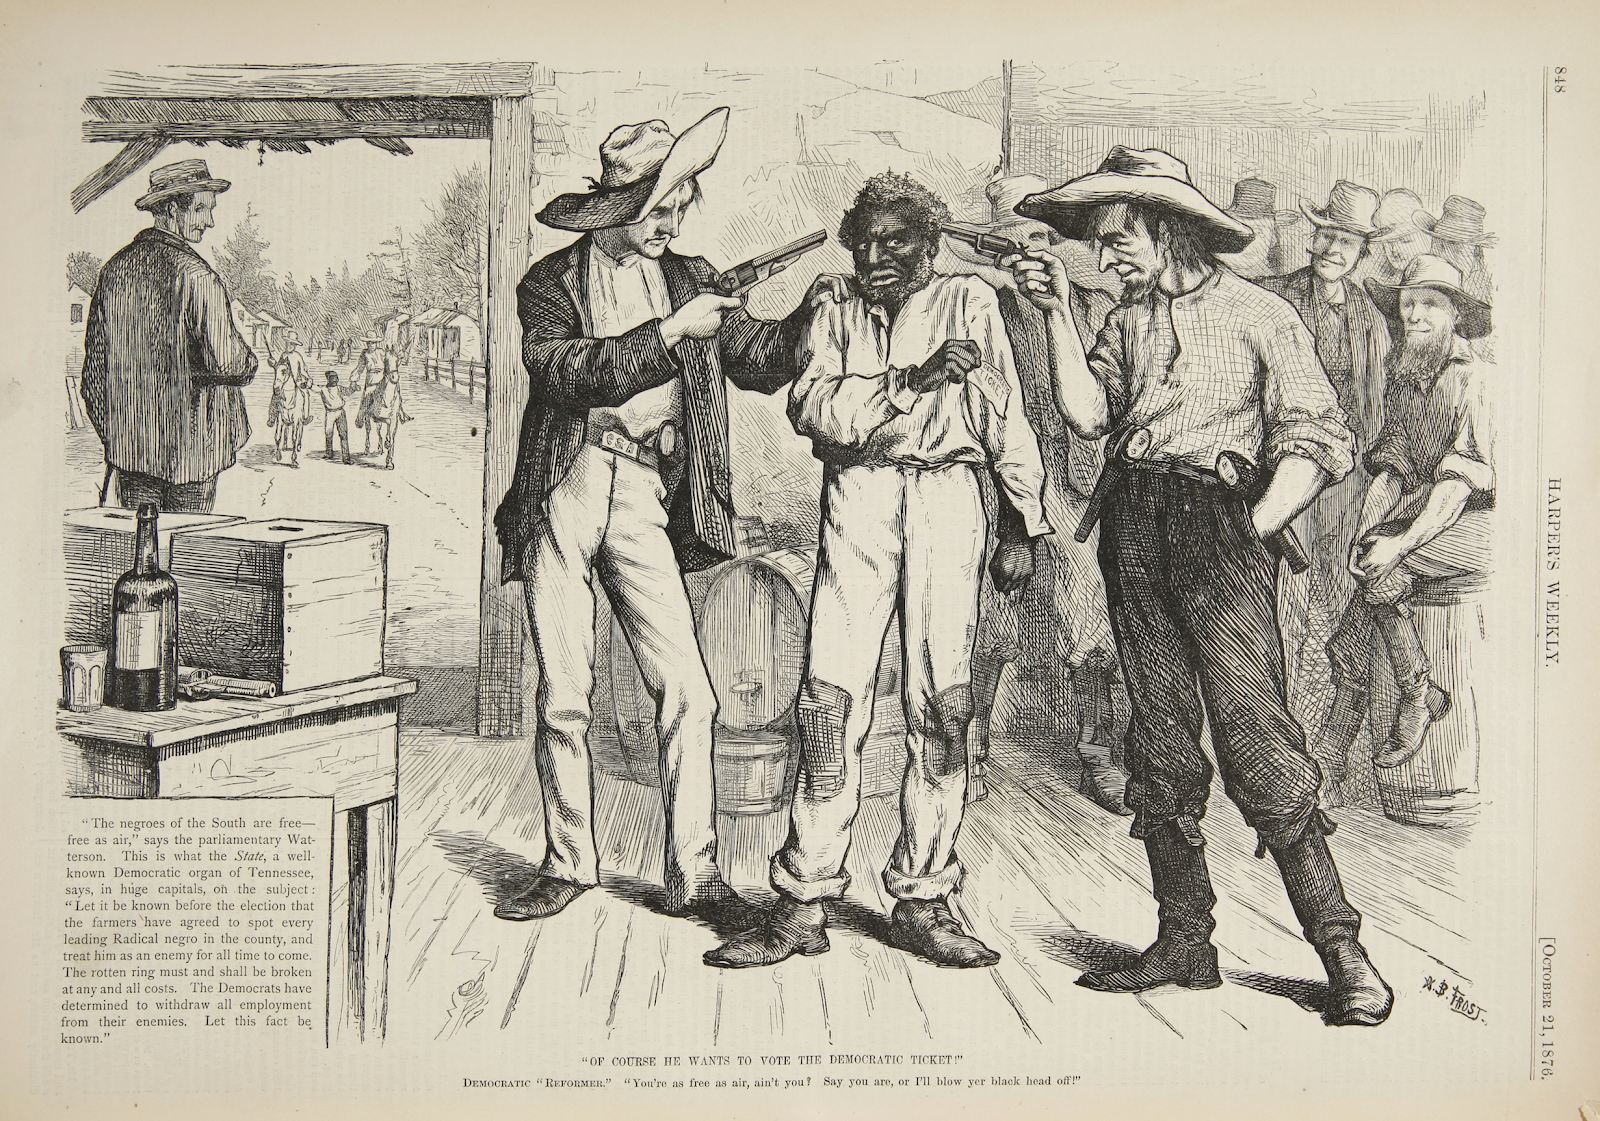 A Depiction of white supremacist intimidation of Black voters near the end of the Reconstruction-era South